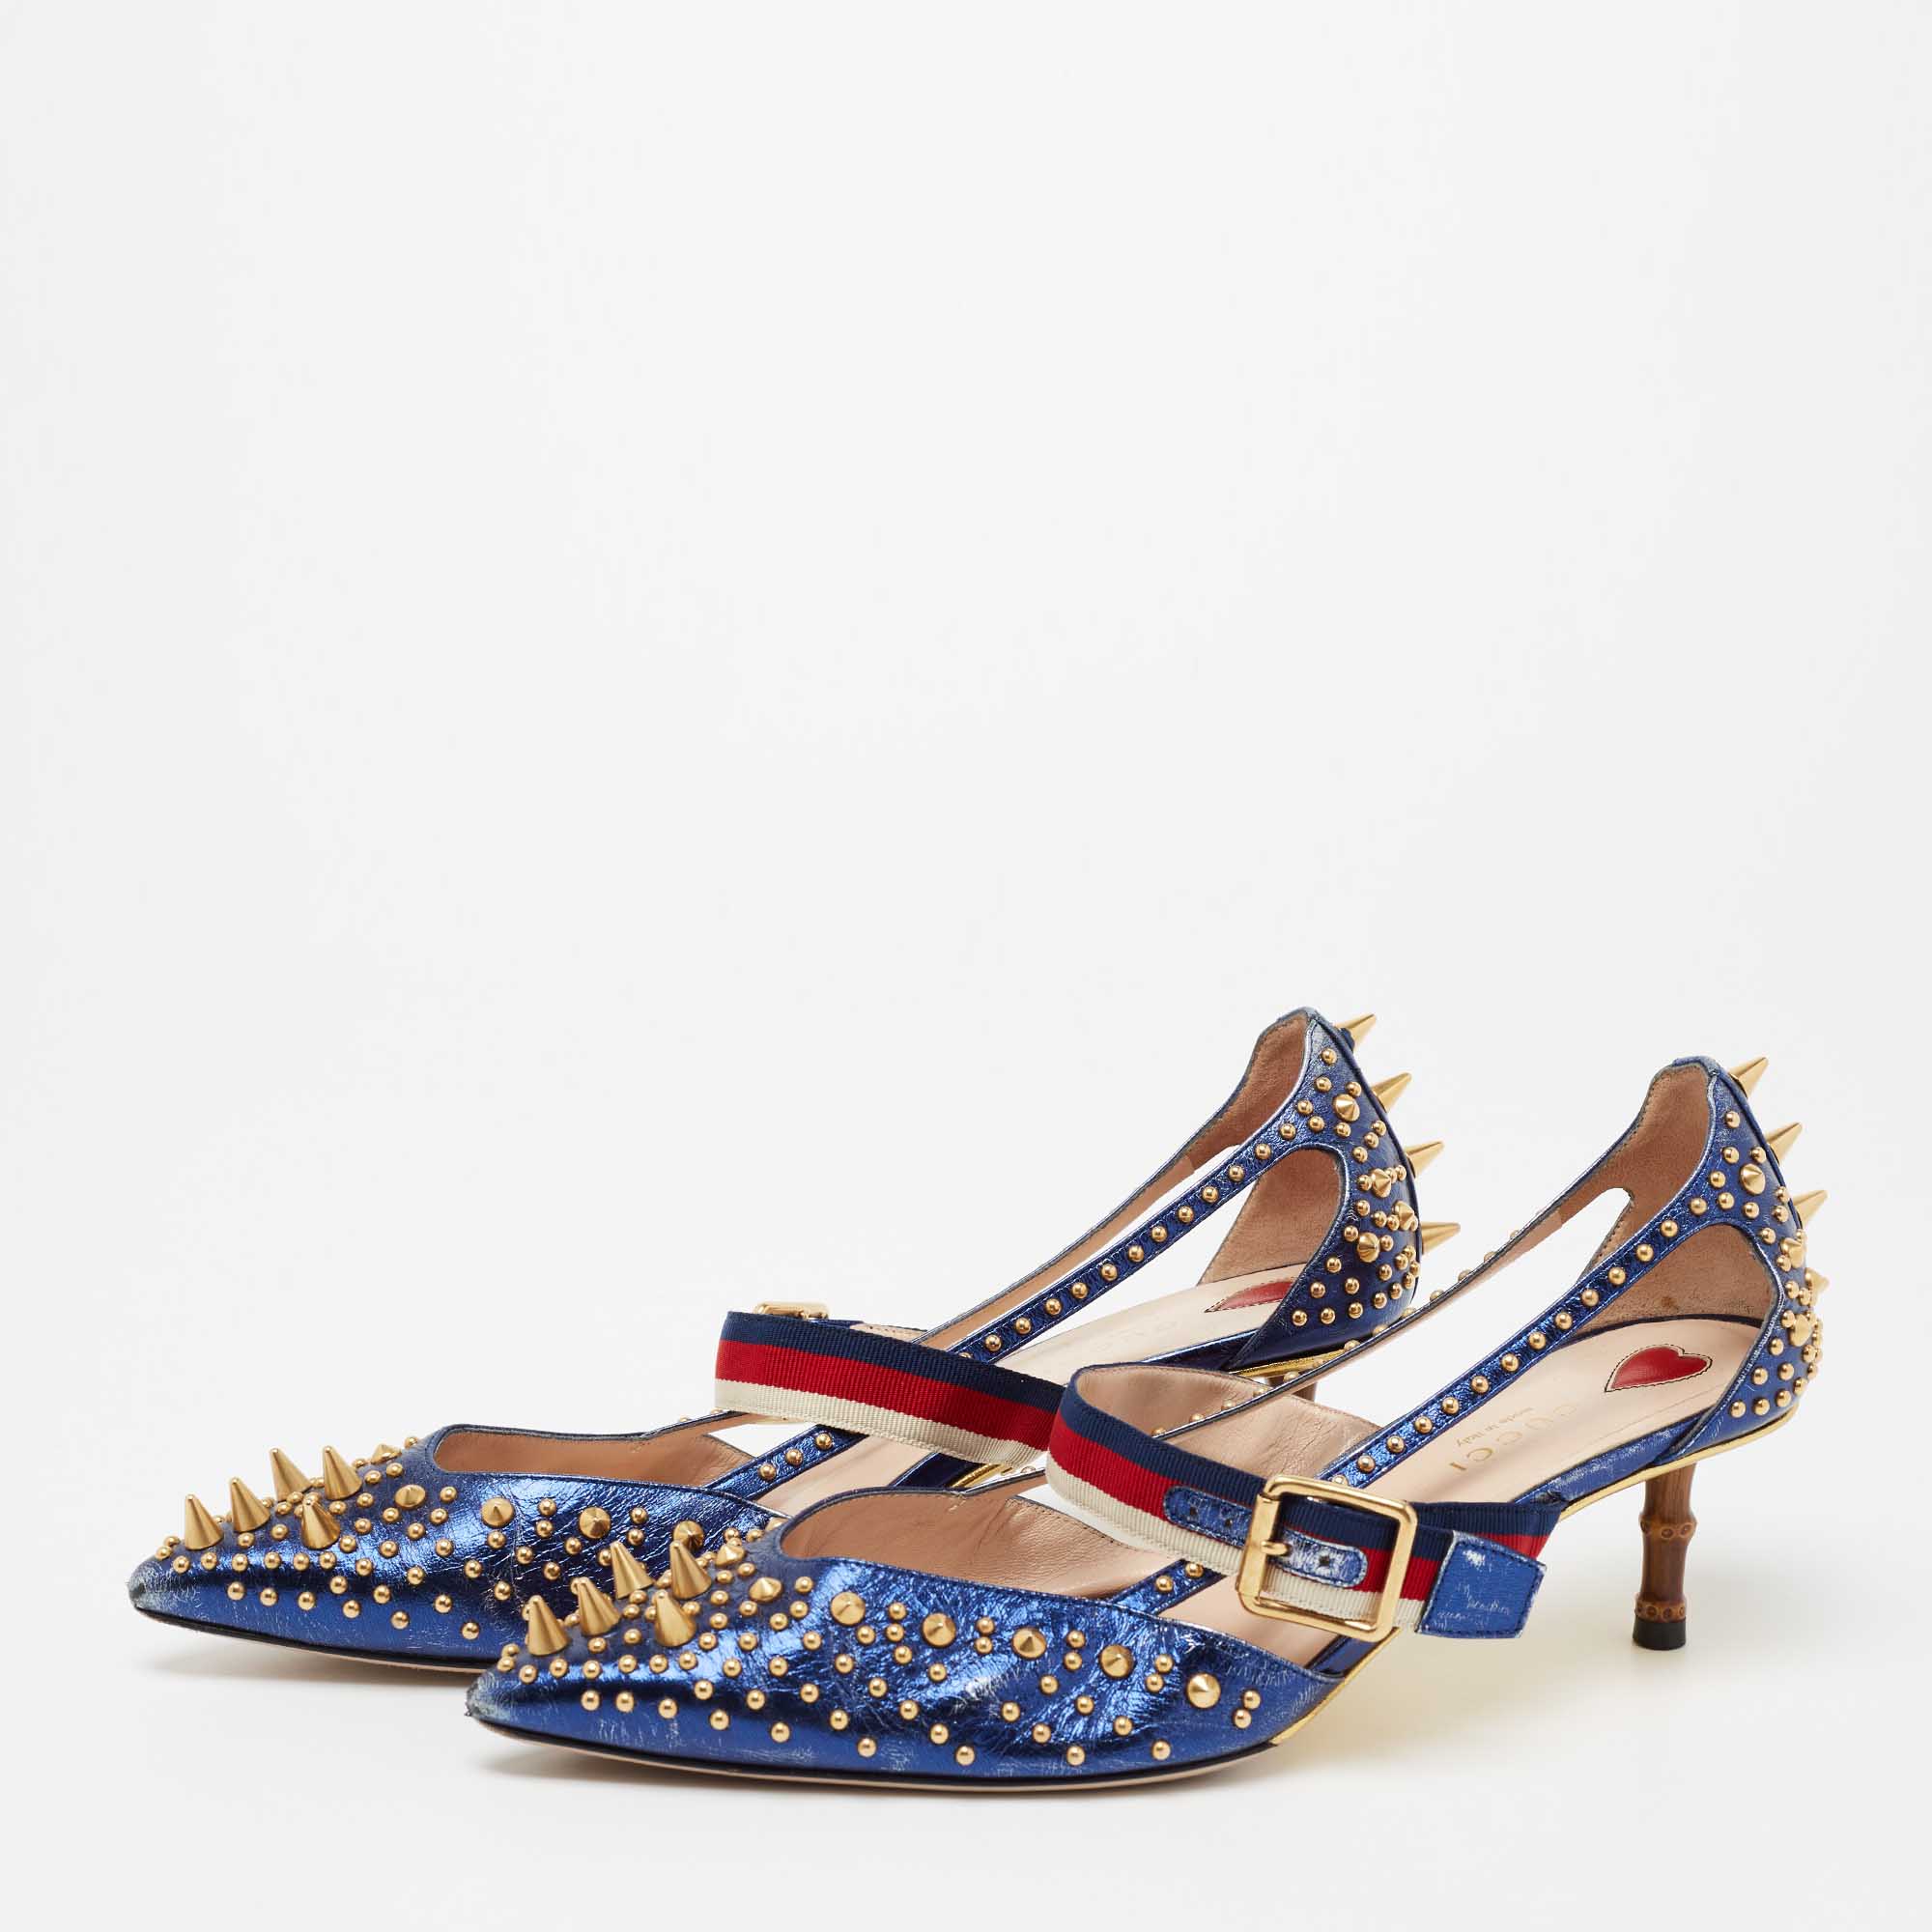 

Gucci Metallic Blue Leather Unia Spiked Mary Jane Pumps Size